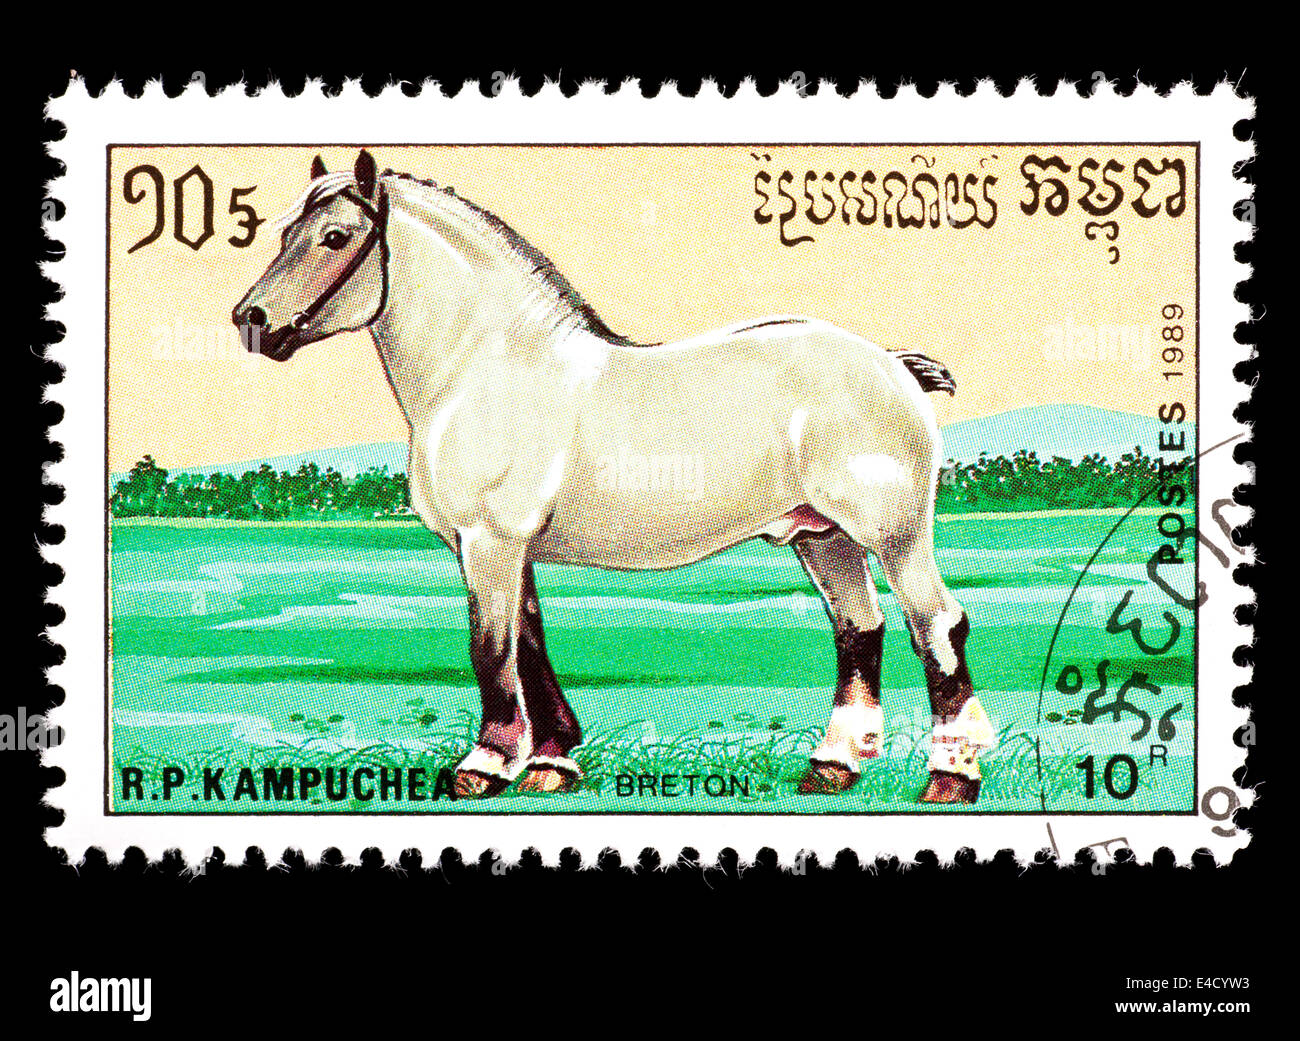 Postage stamp from Cambodia (Kampuchea) depicting a Breton draft horse. Stock Photo